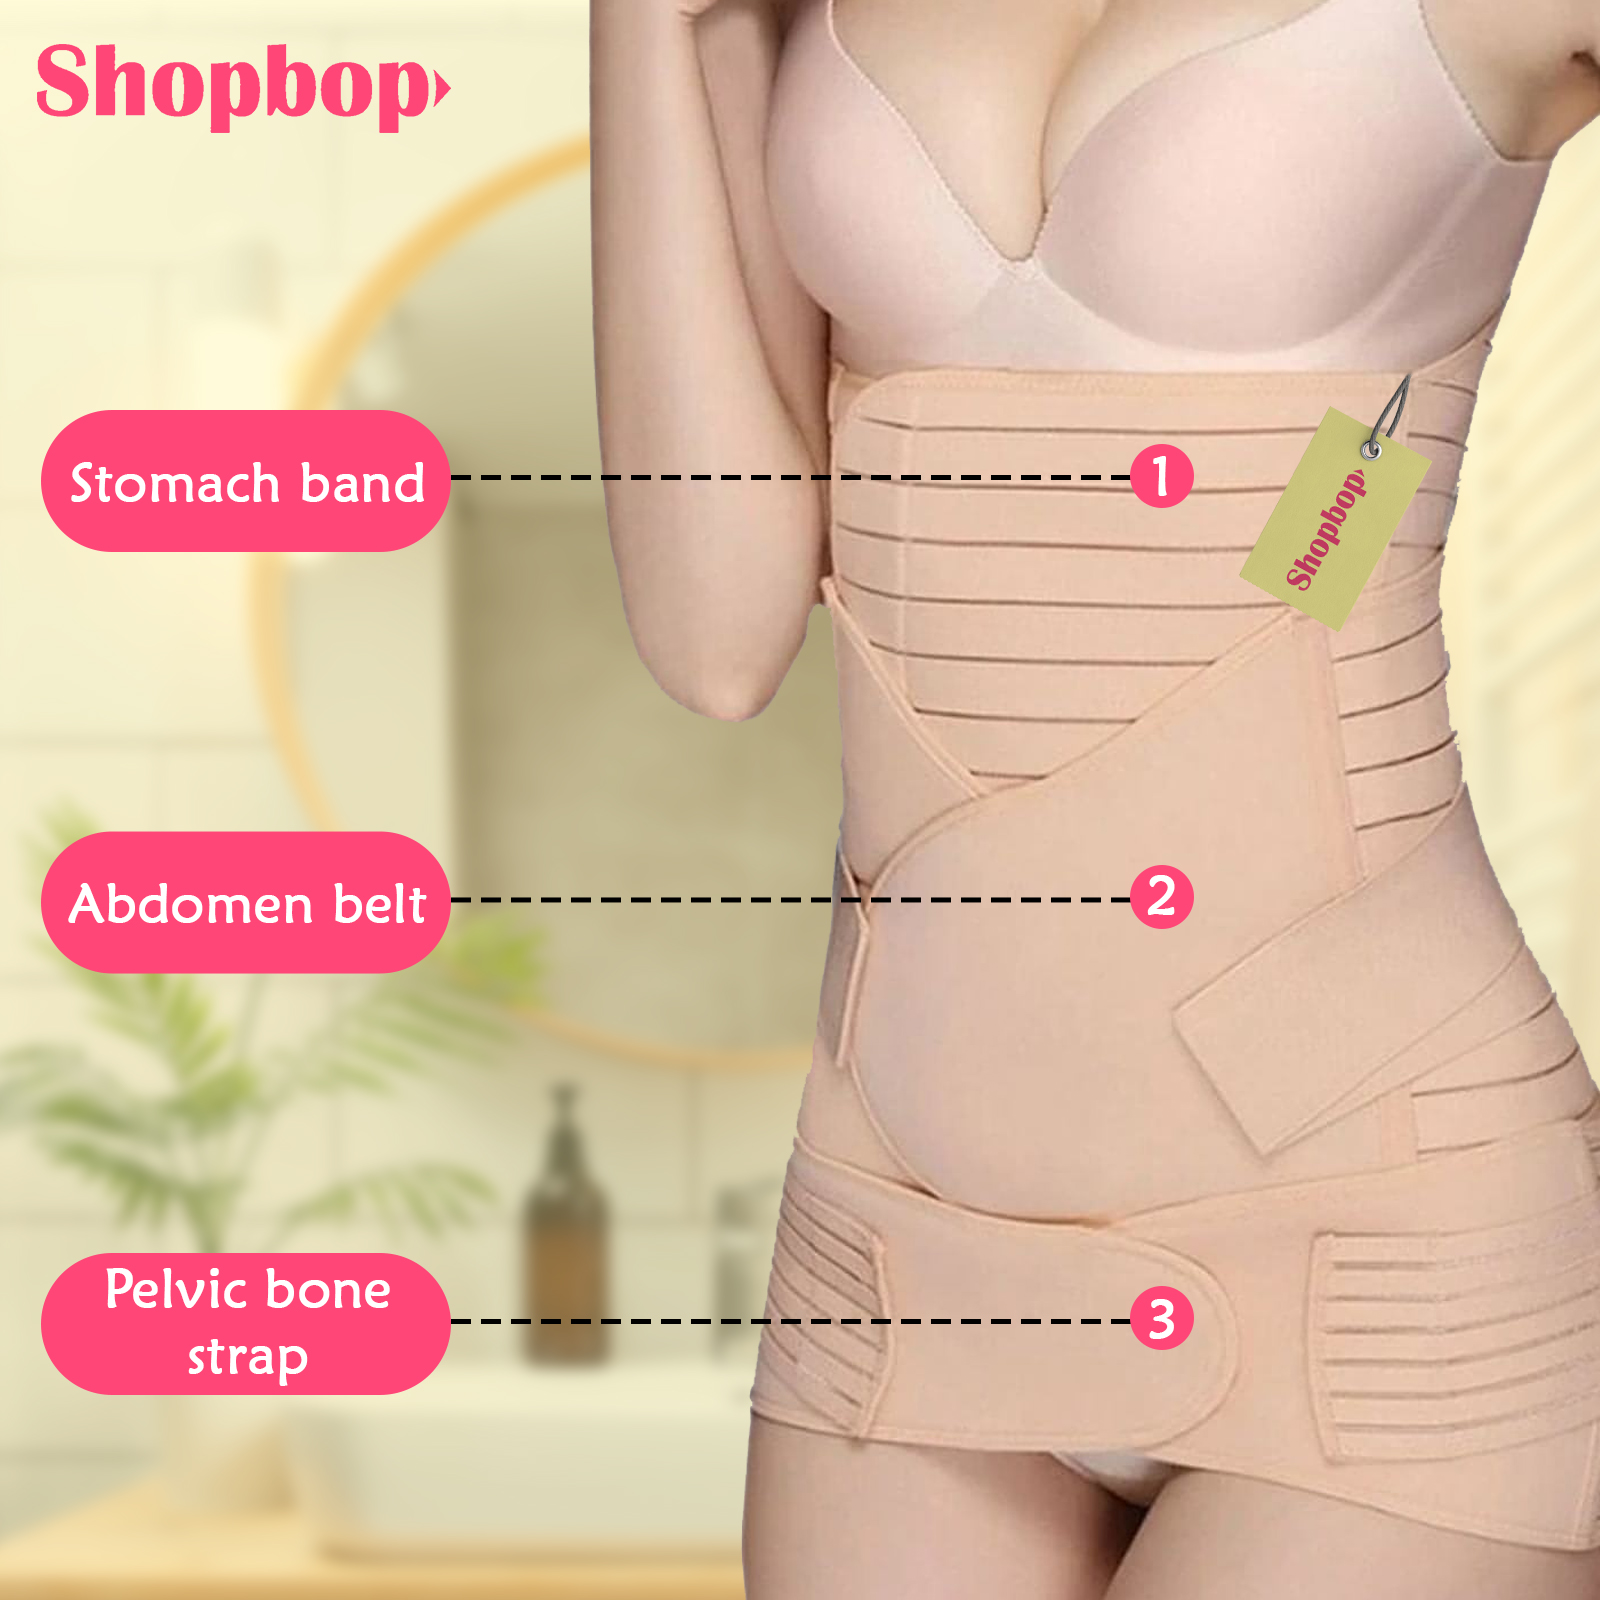 Cheap Women Post Partum Recovery Body Shaper C-Section Maternity